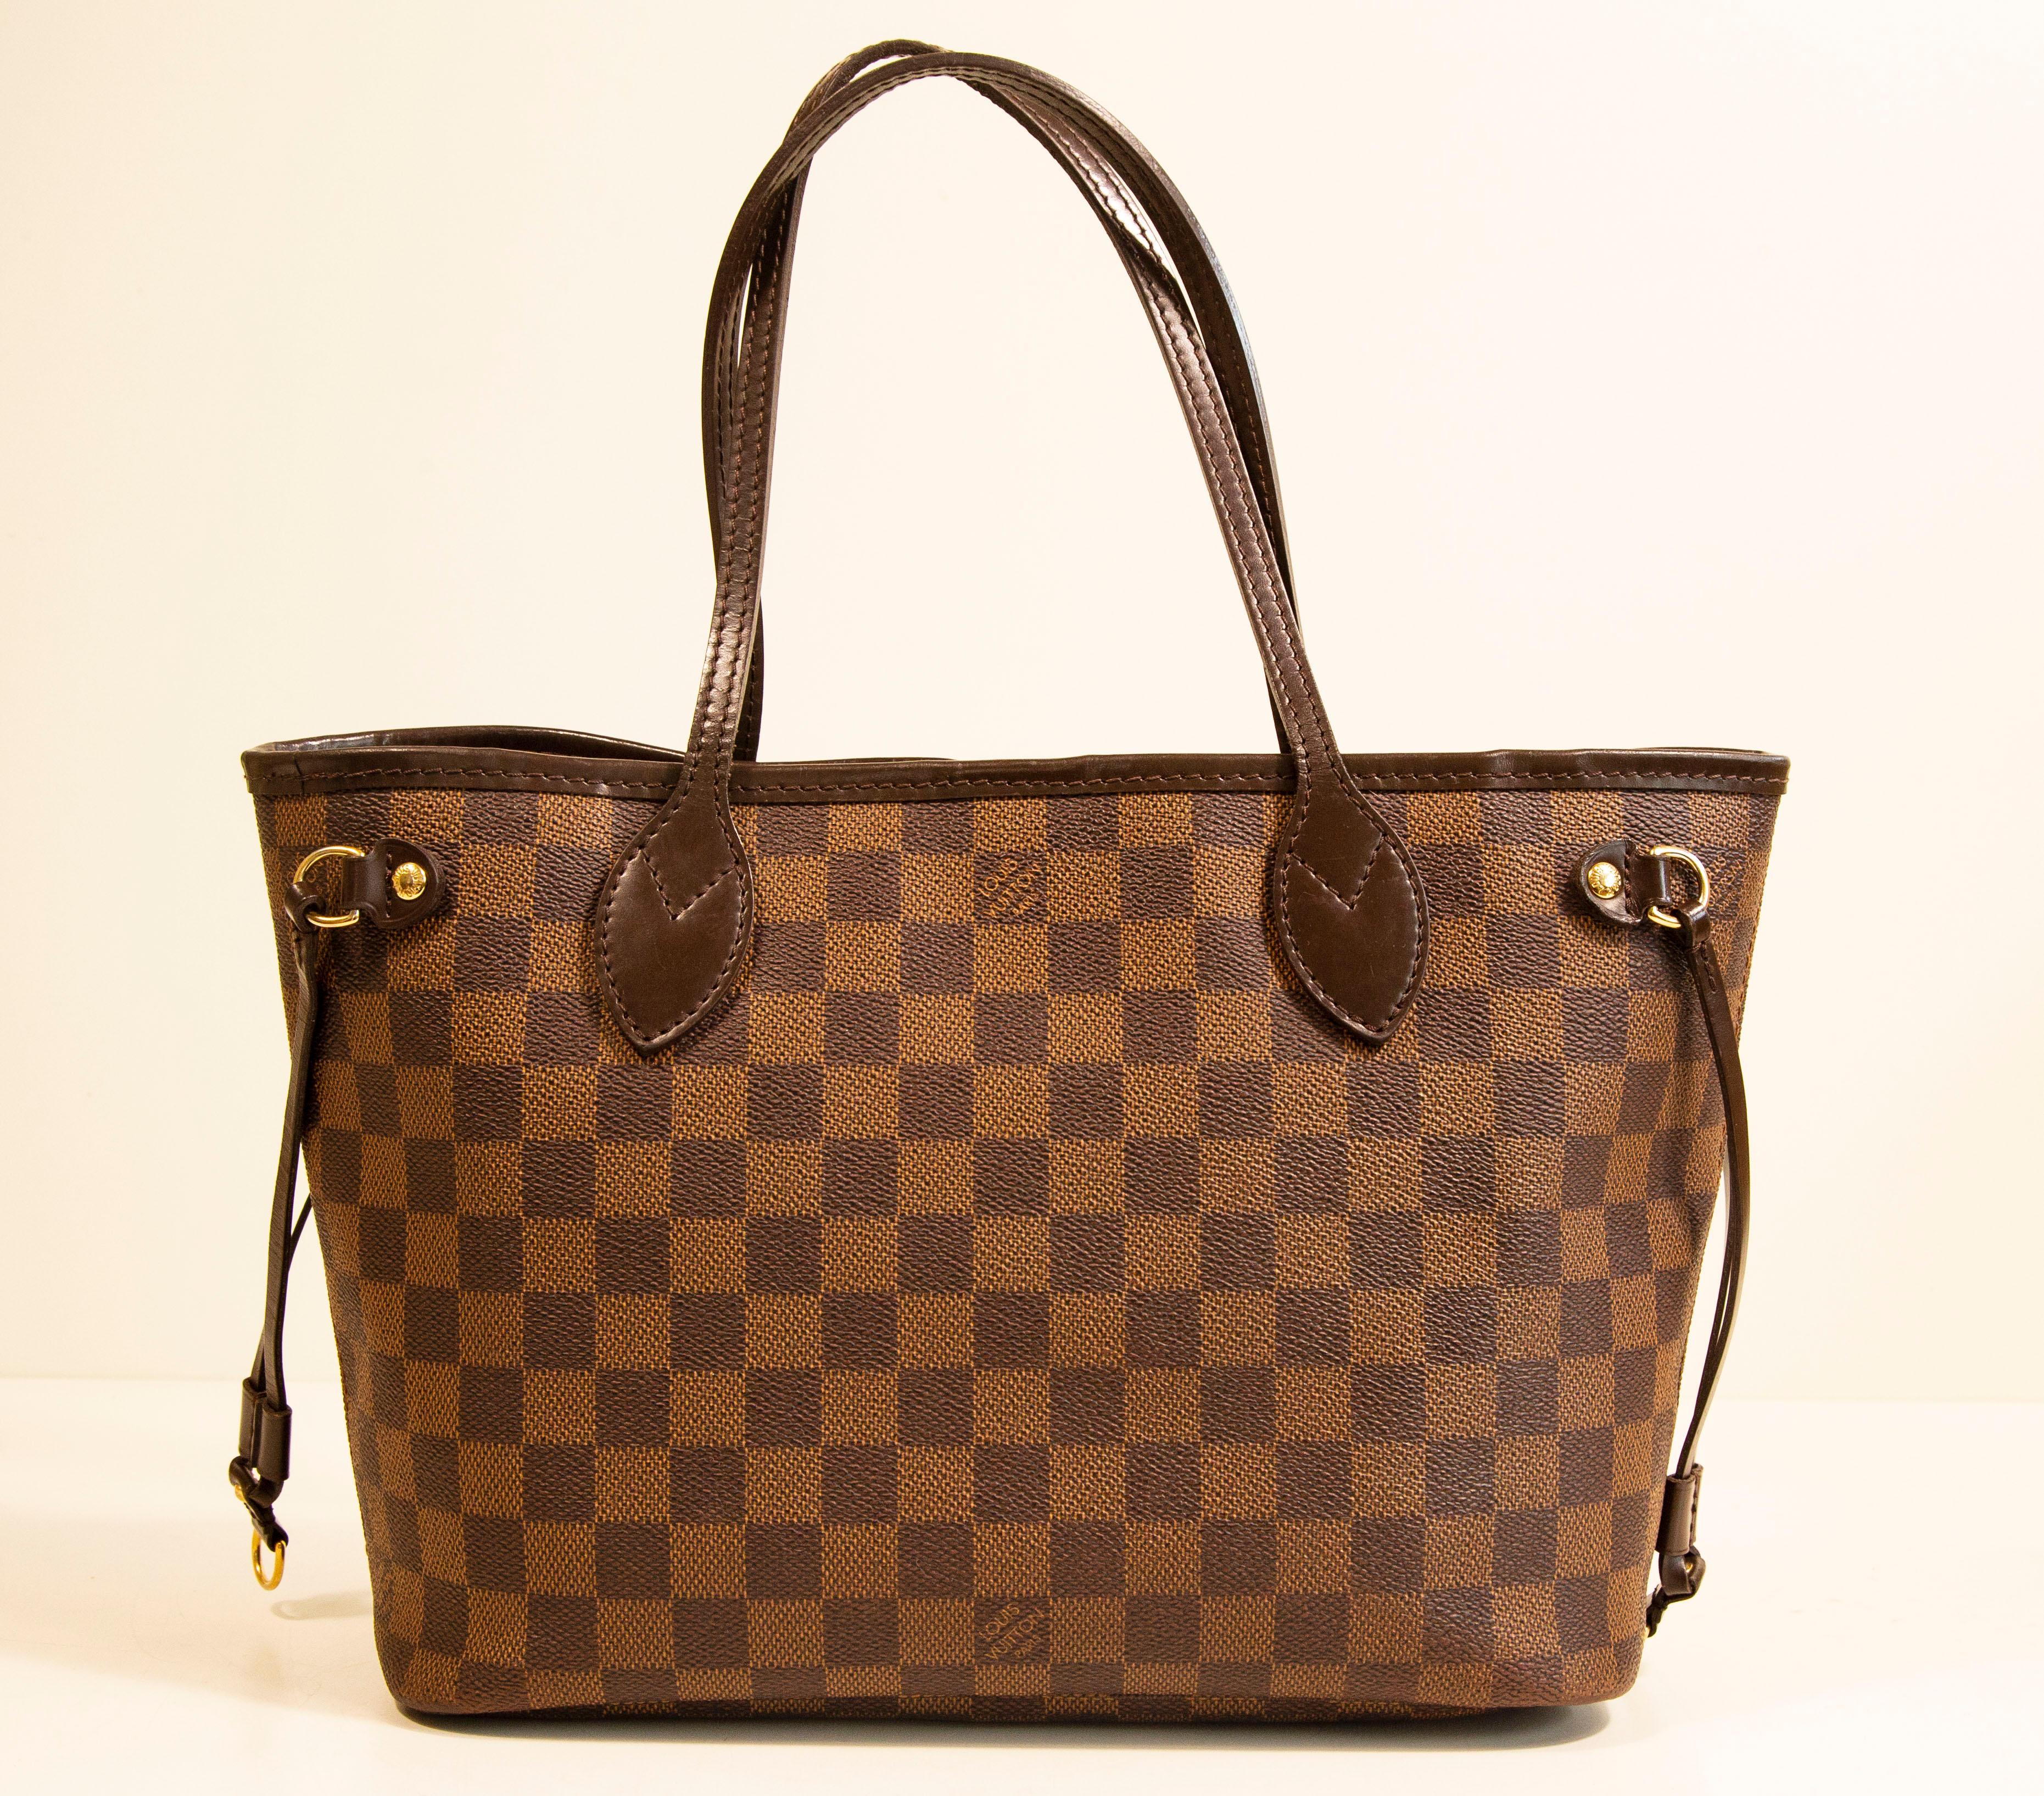 Women's Louis Vuitton Neverfull PM Tote Shoulder Bag in Damier Ebene For Sale